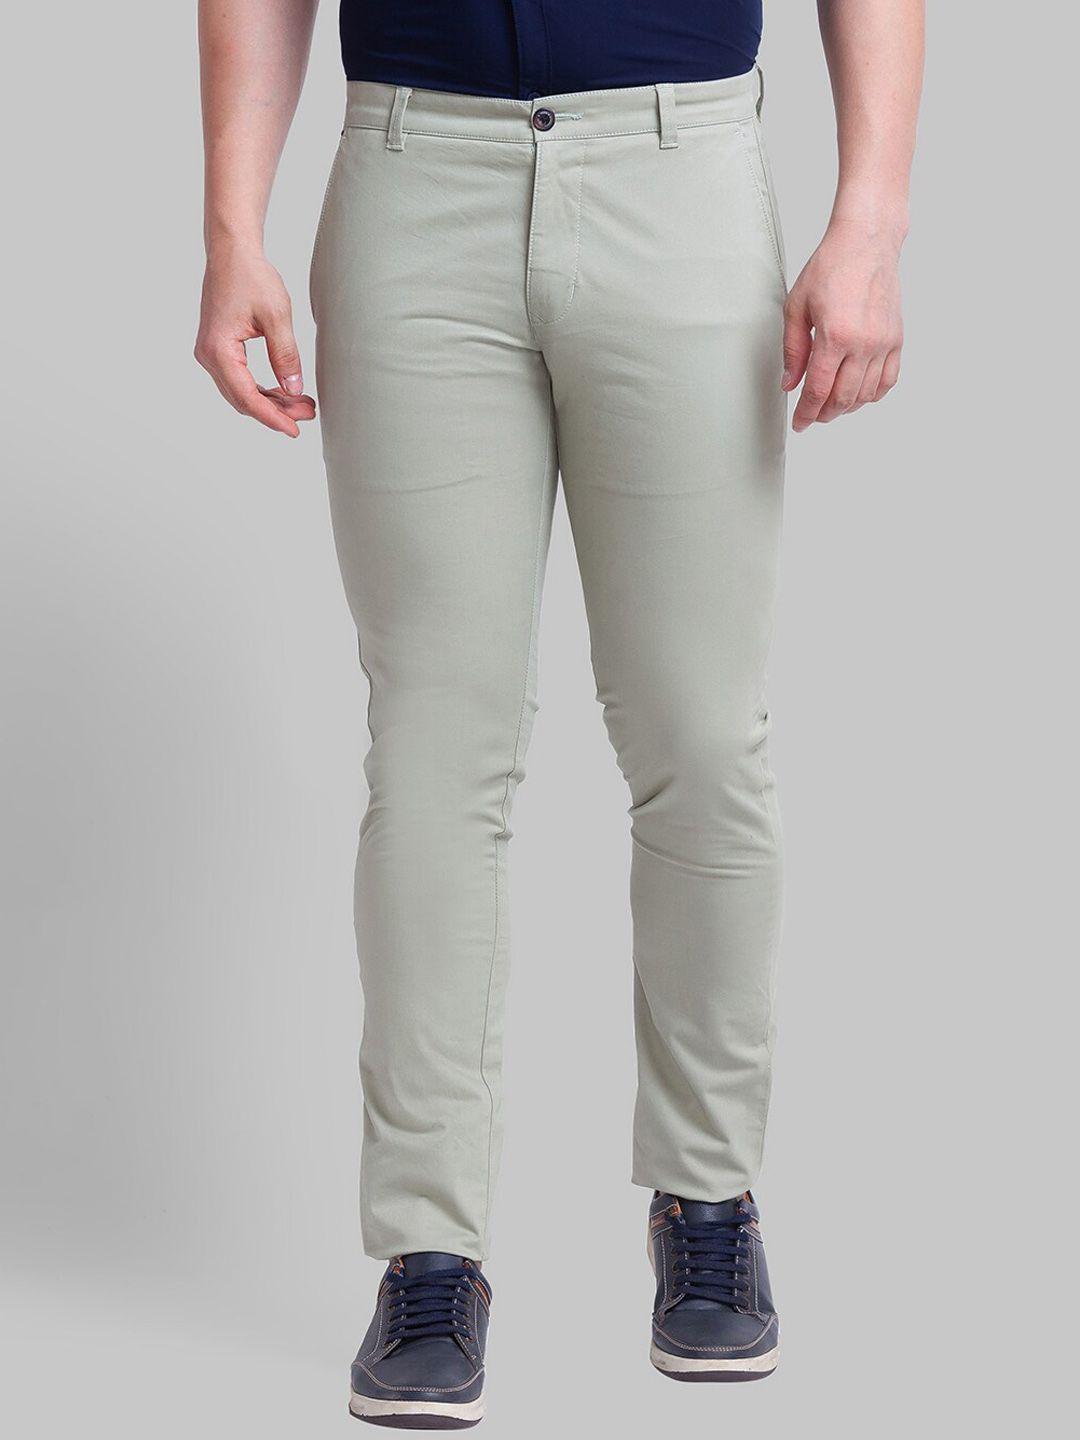 parx-men-green-tapered-fit-trousers